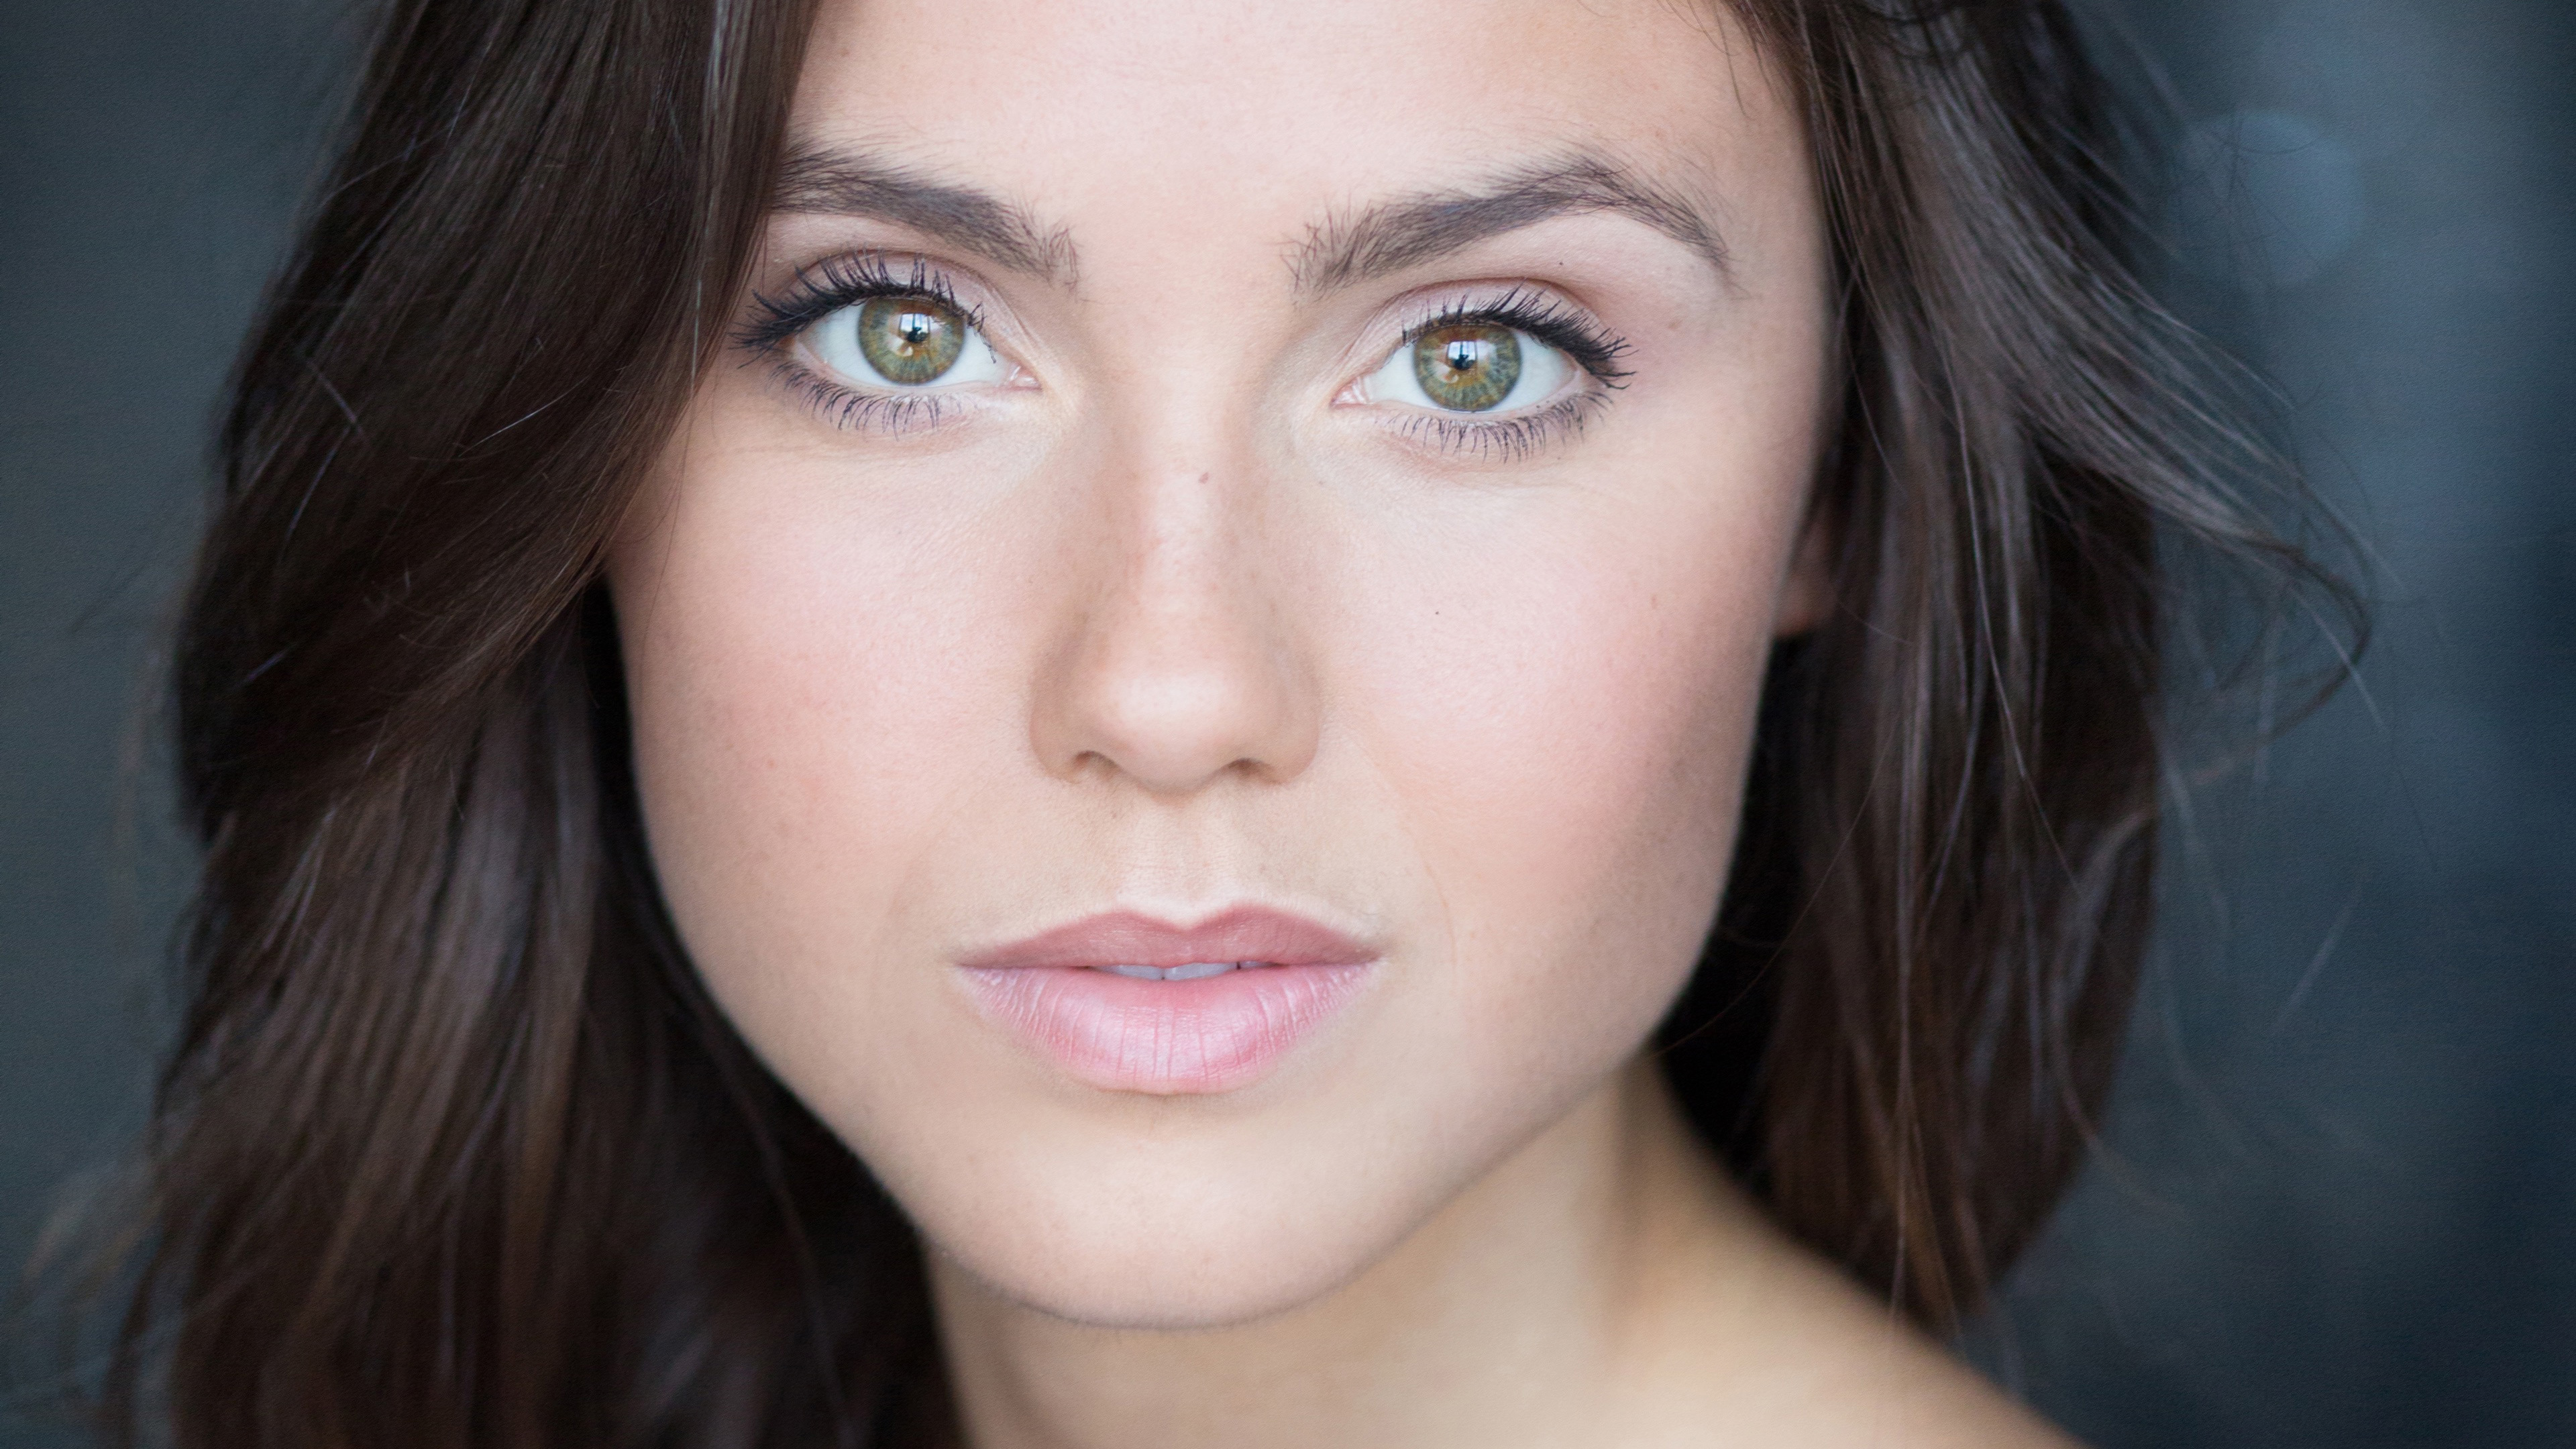 Poppy Drayton Wallpapers High Resolution and Quality Download